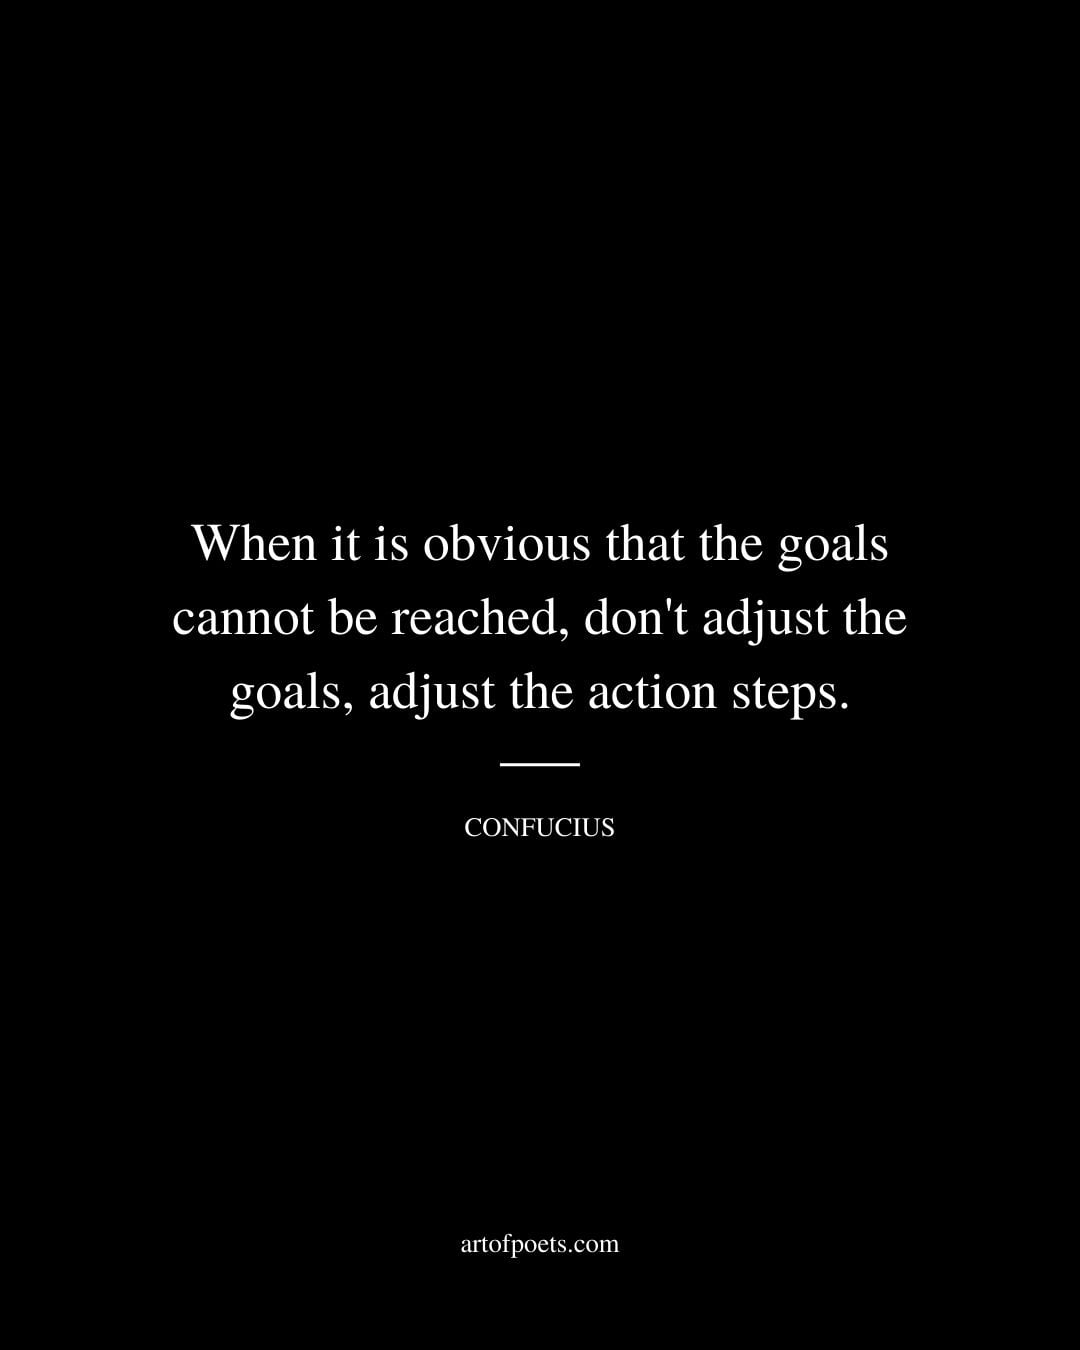 When it is obvious that the goals cannot be reached dont adjust the goals adjust the action steps